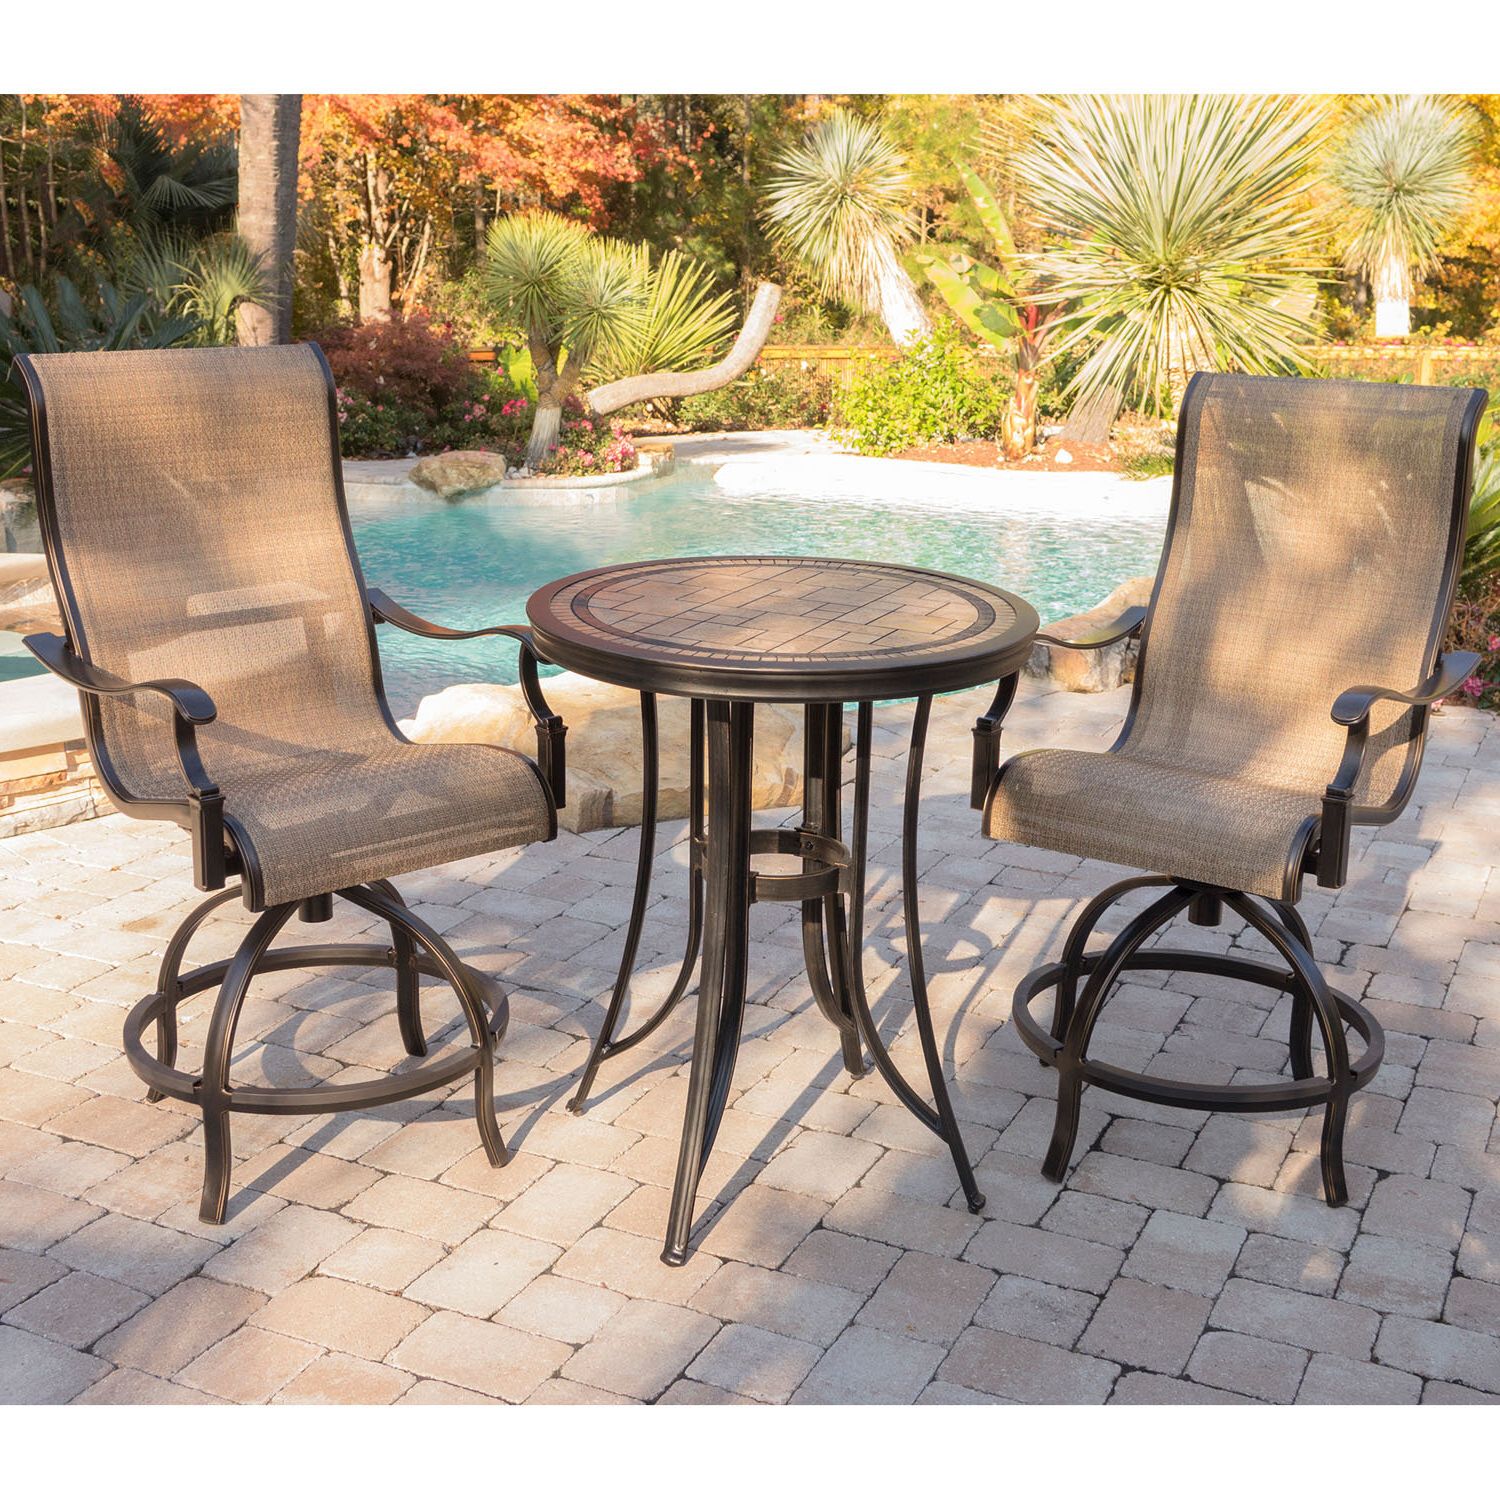 Patio Furniture Sets Of This Quality Last For Years (View 3 of 15)